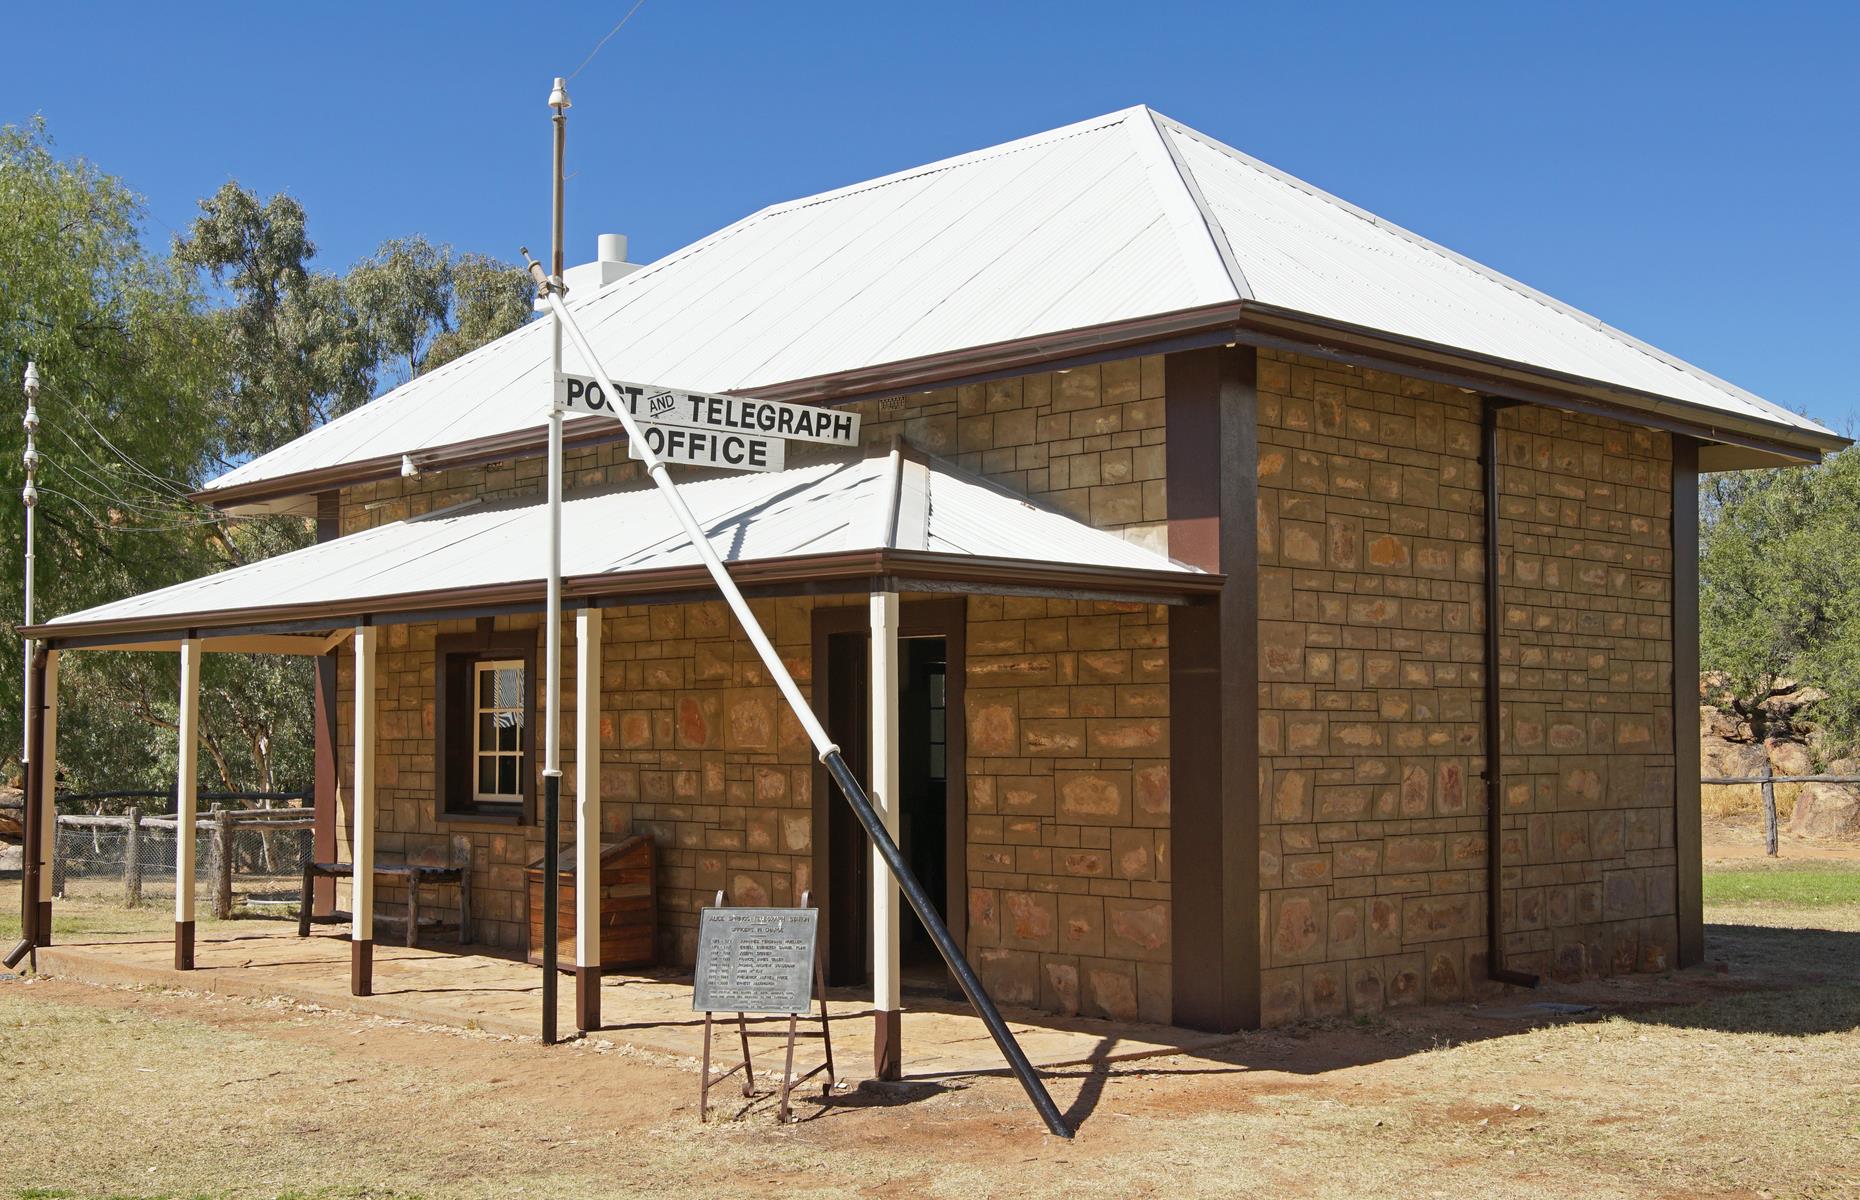 The True Aussie Spirit Is Alive And Well In These Authentic Outback Towns